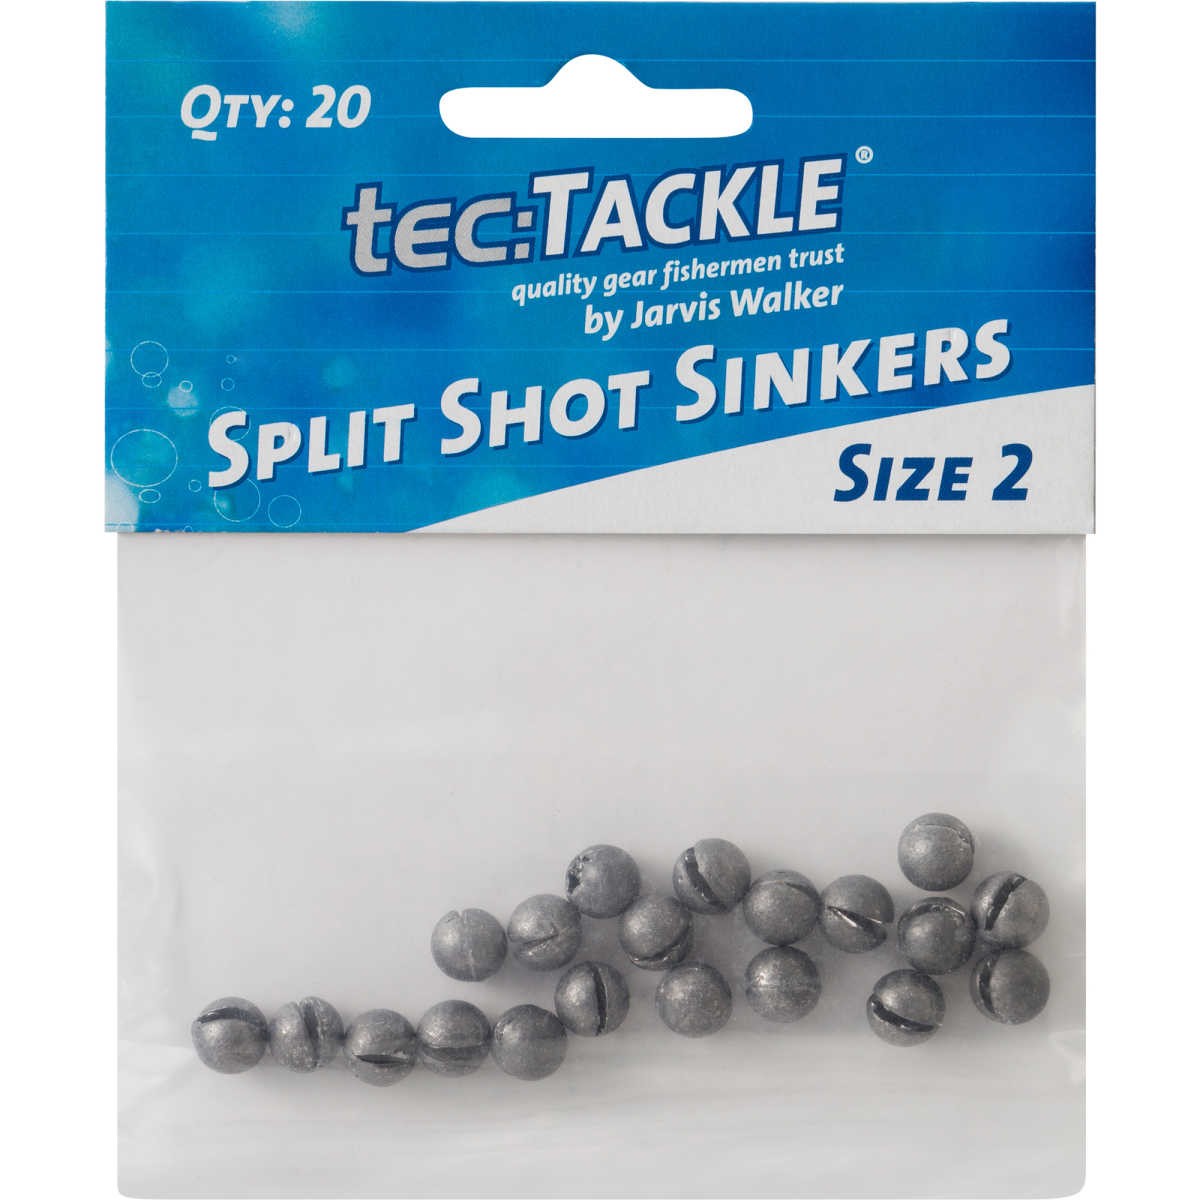 Tec:Tackle Split Shot Size 2 Qty 20 -  - Mansfield Hunting & Fishing - Products to prepare for Corona Virus